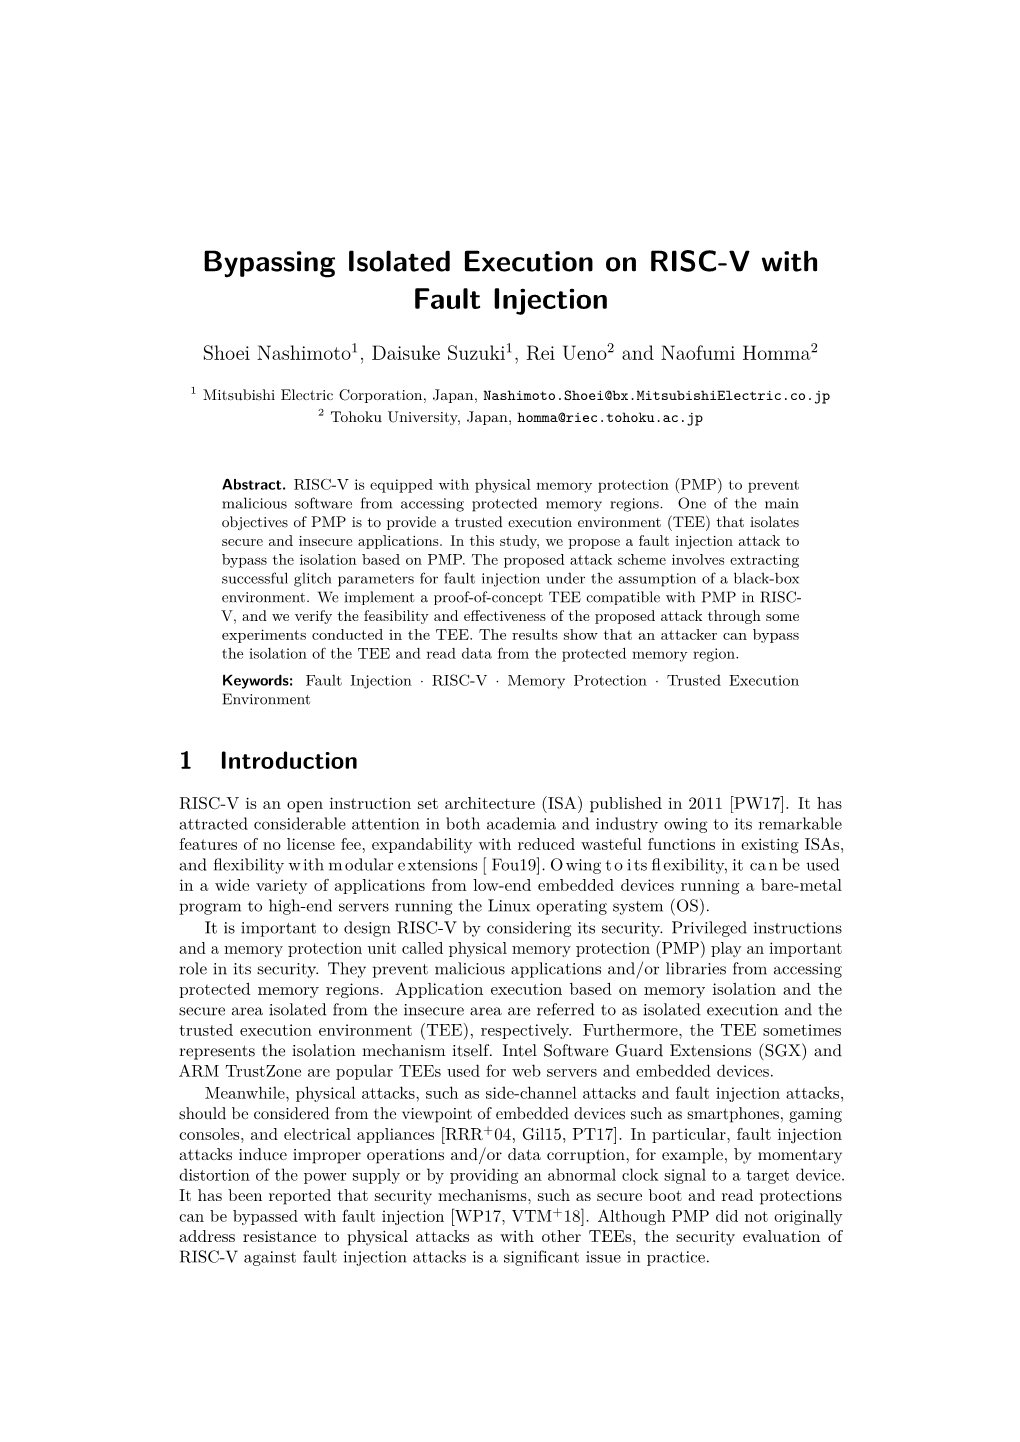 Bypassing Isolated Execution on RISC-V with Fault Injection